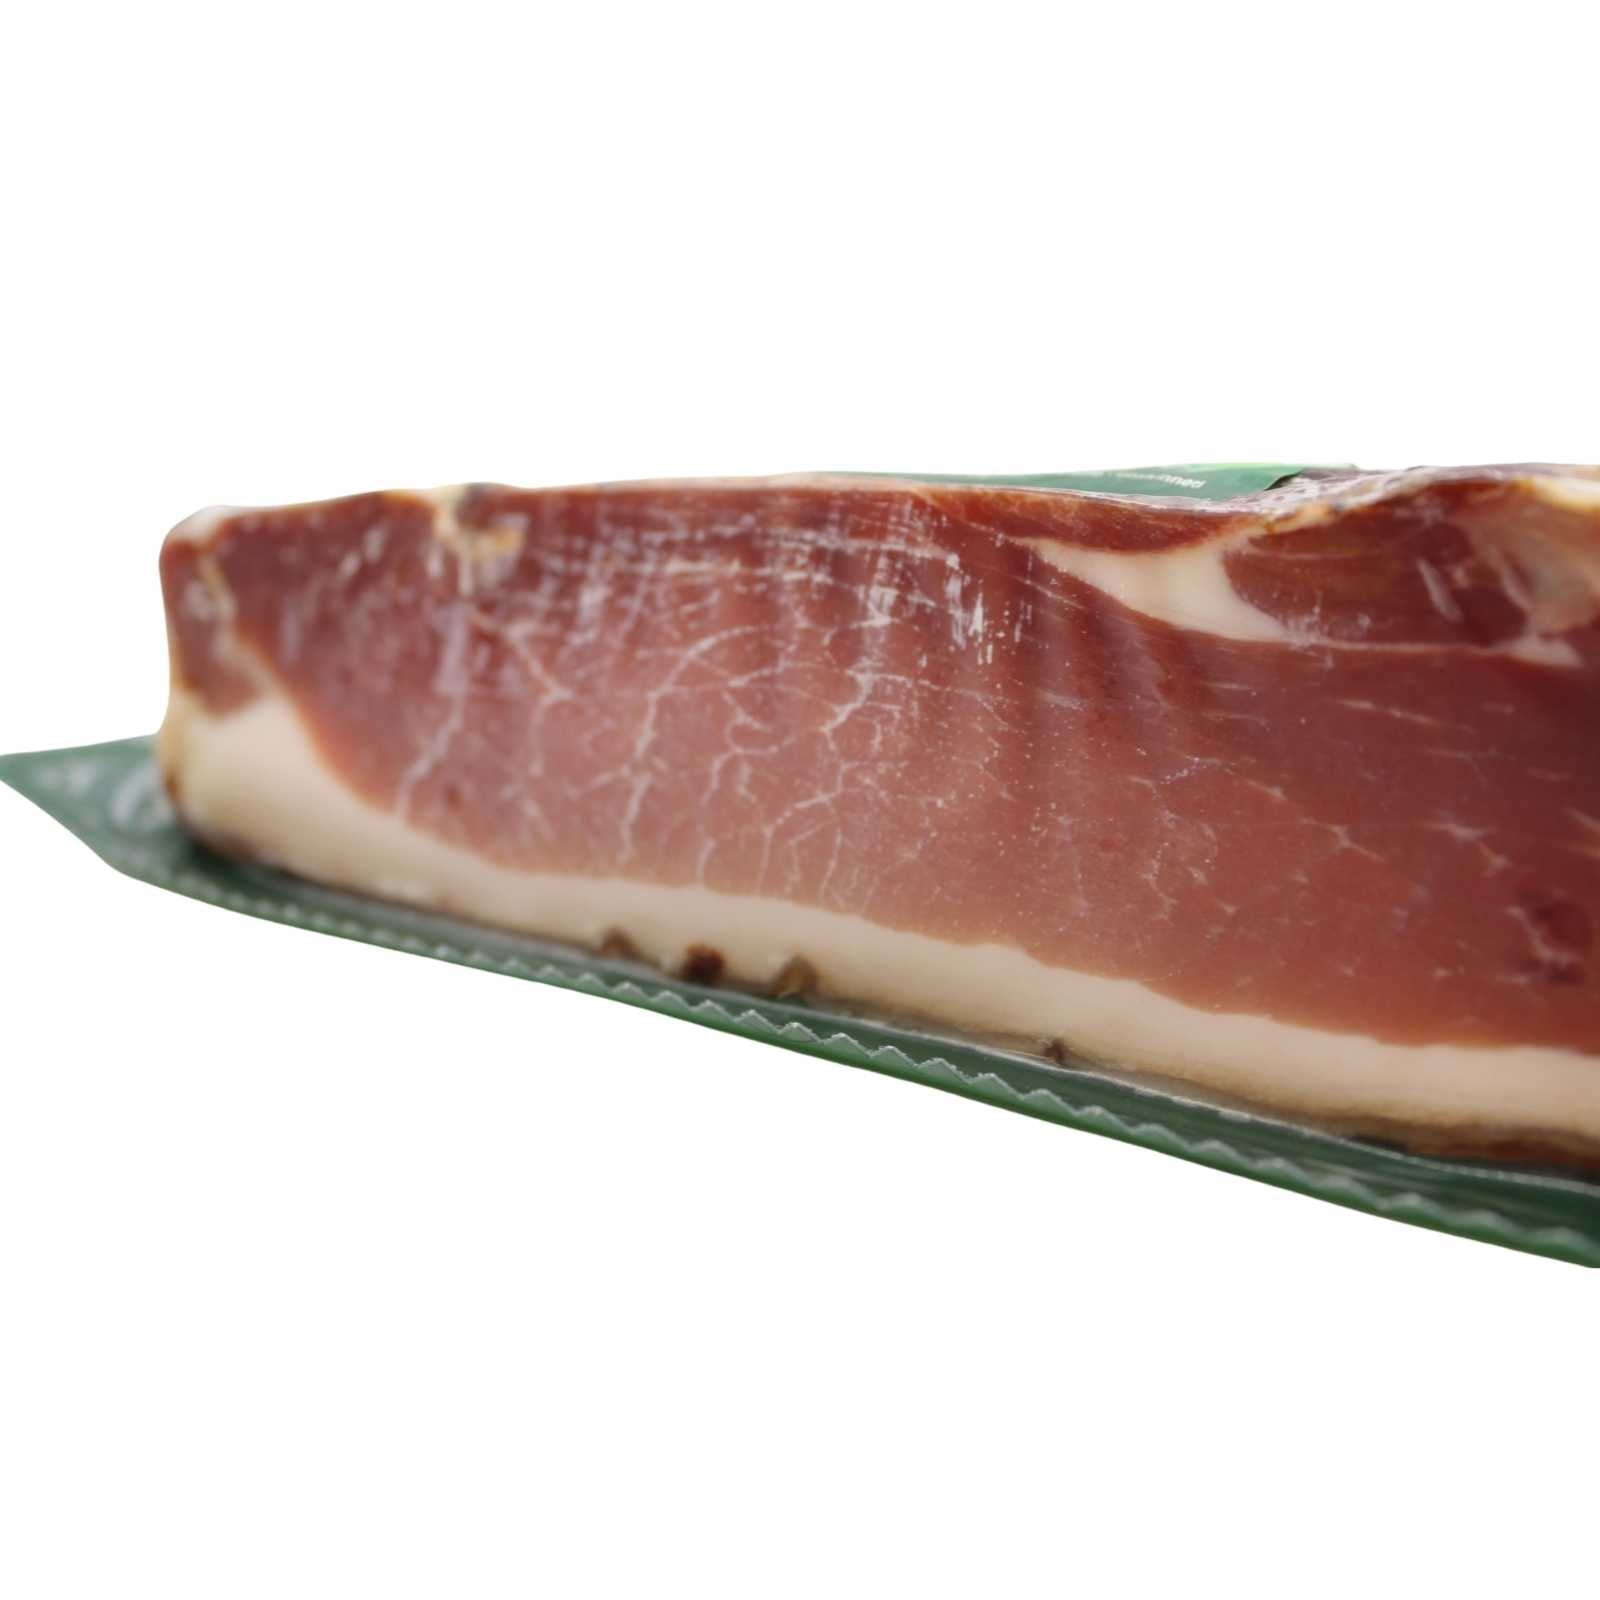 SPECK | Smoked Cured Ham - Prosciutto | Weight approx. 5 lbs | by Moser brand close up